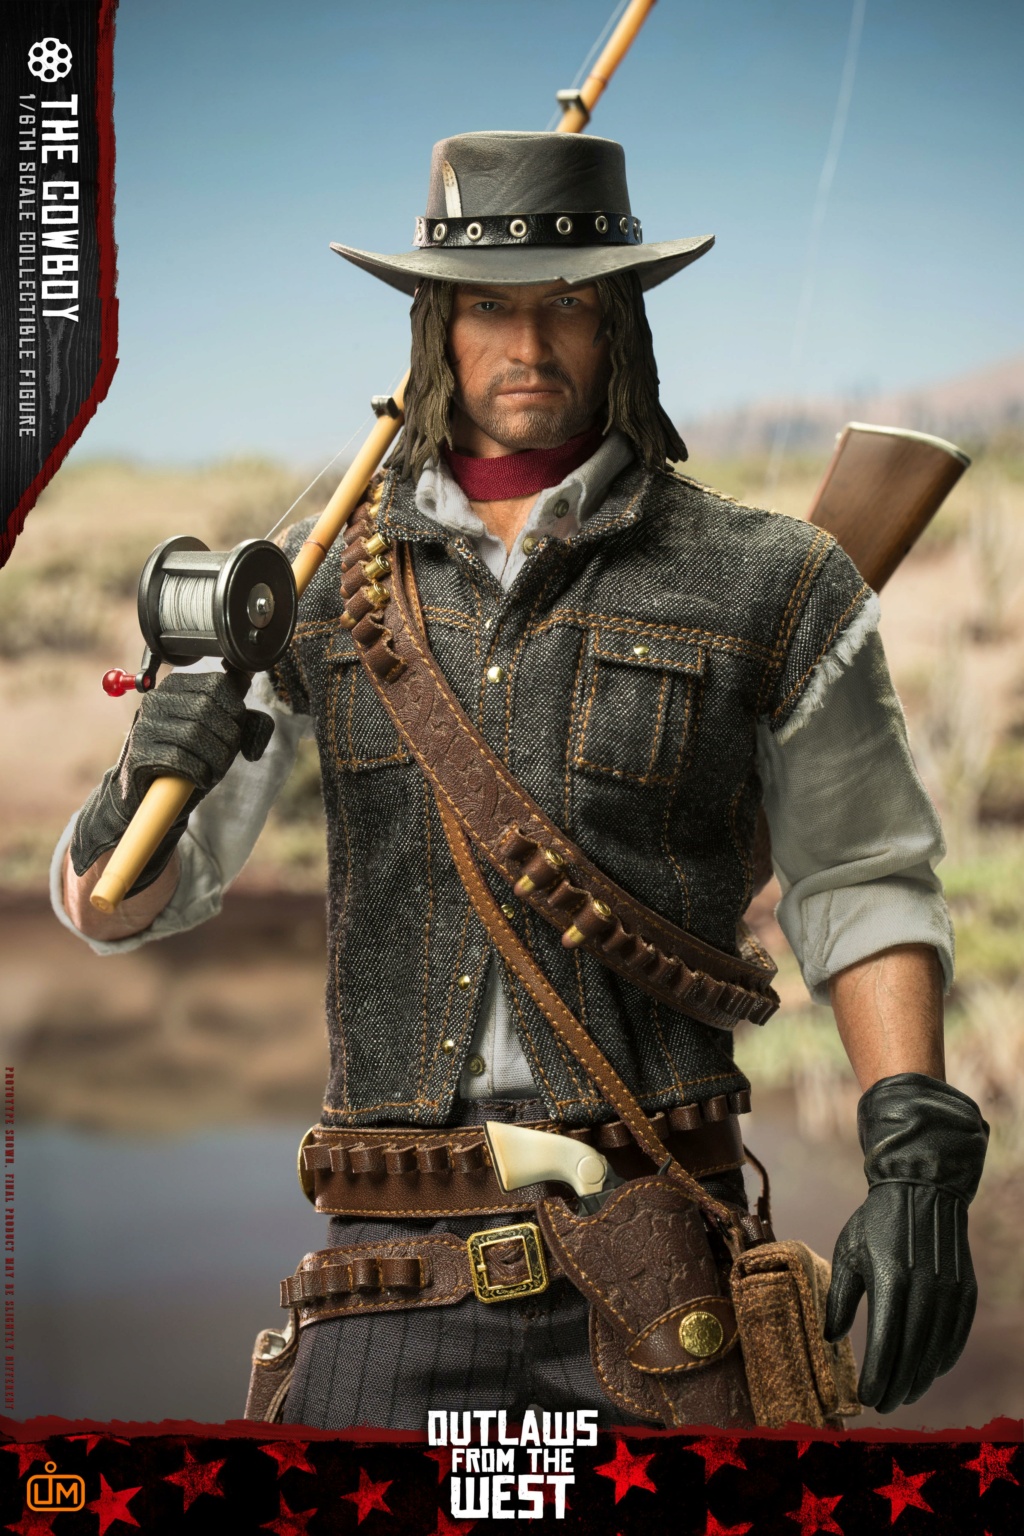 NEW PRODUCT: LIM TOYS: Outlaws of the West Series: The Cowboy 1/6 scale action figure 41694910